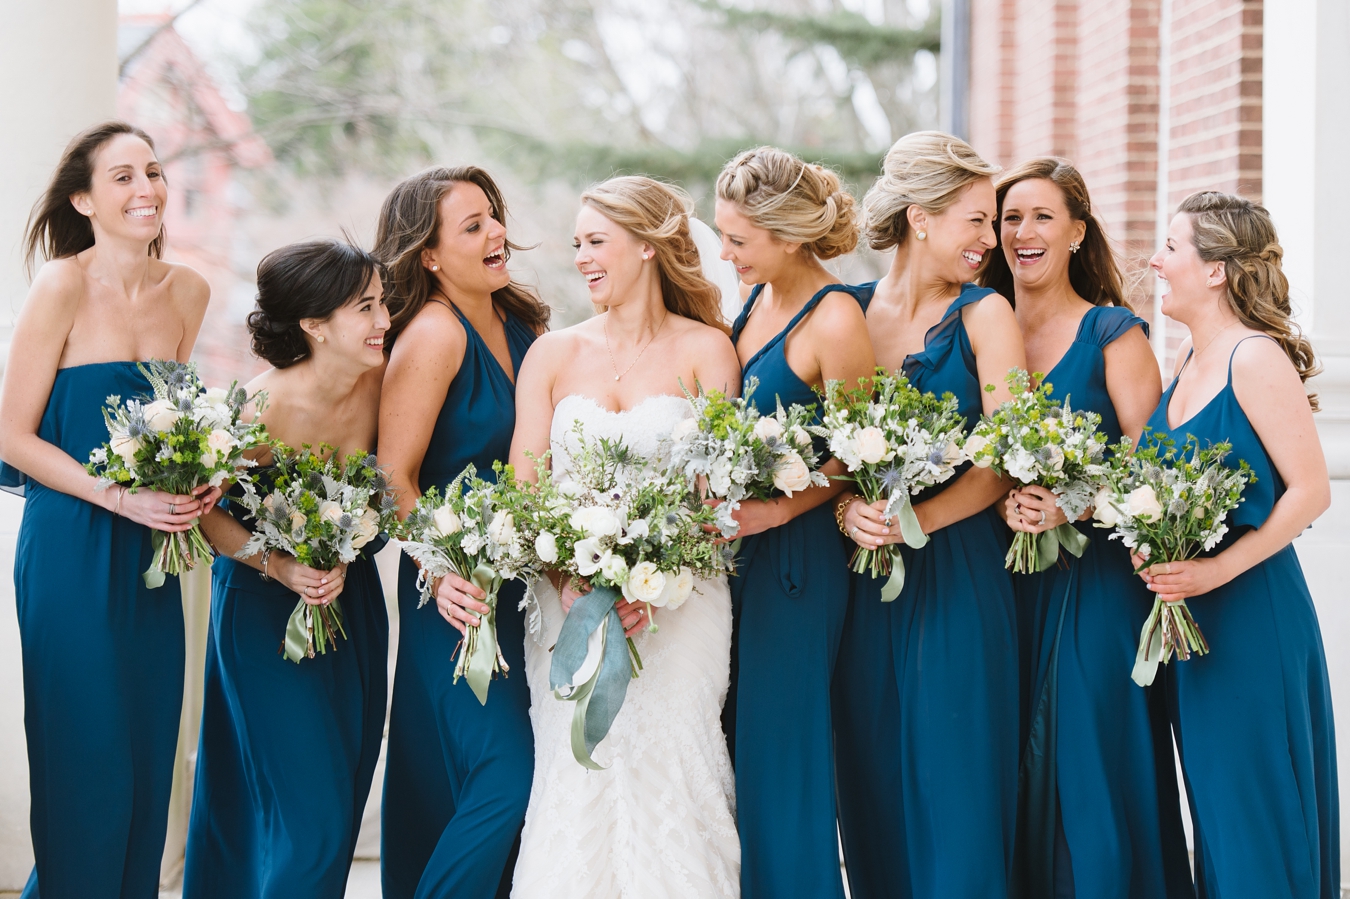 Royal Blue Bridesmaids Dresses and Organic Bouquets by Annapolis Wedding Photographer, Natalie Franke Photography